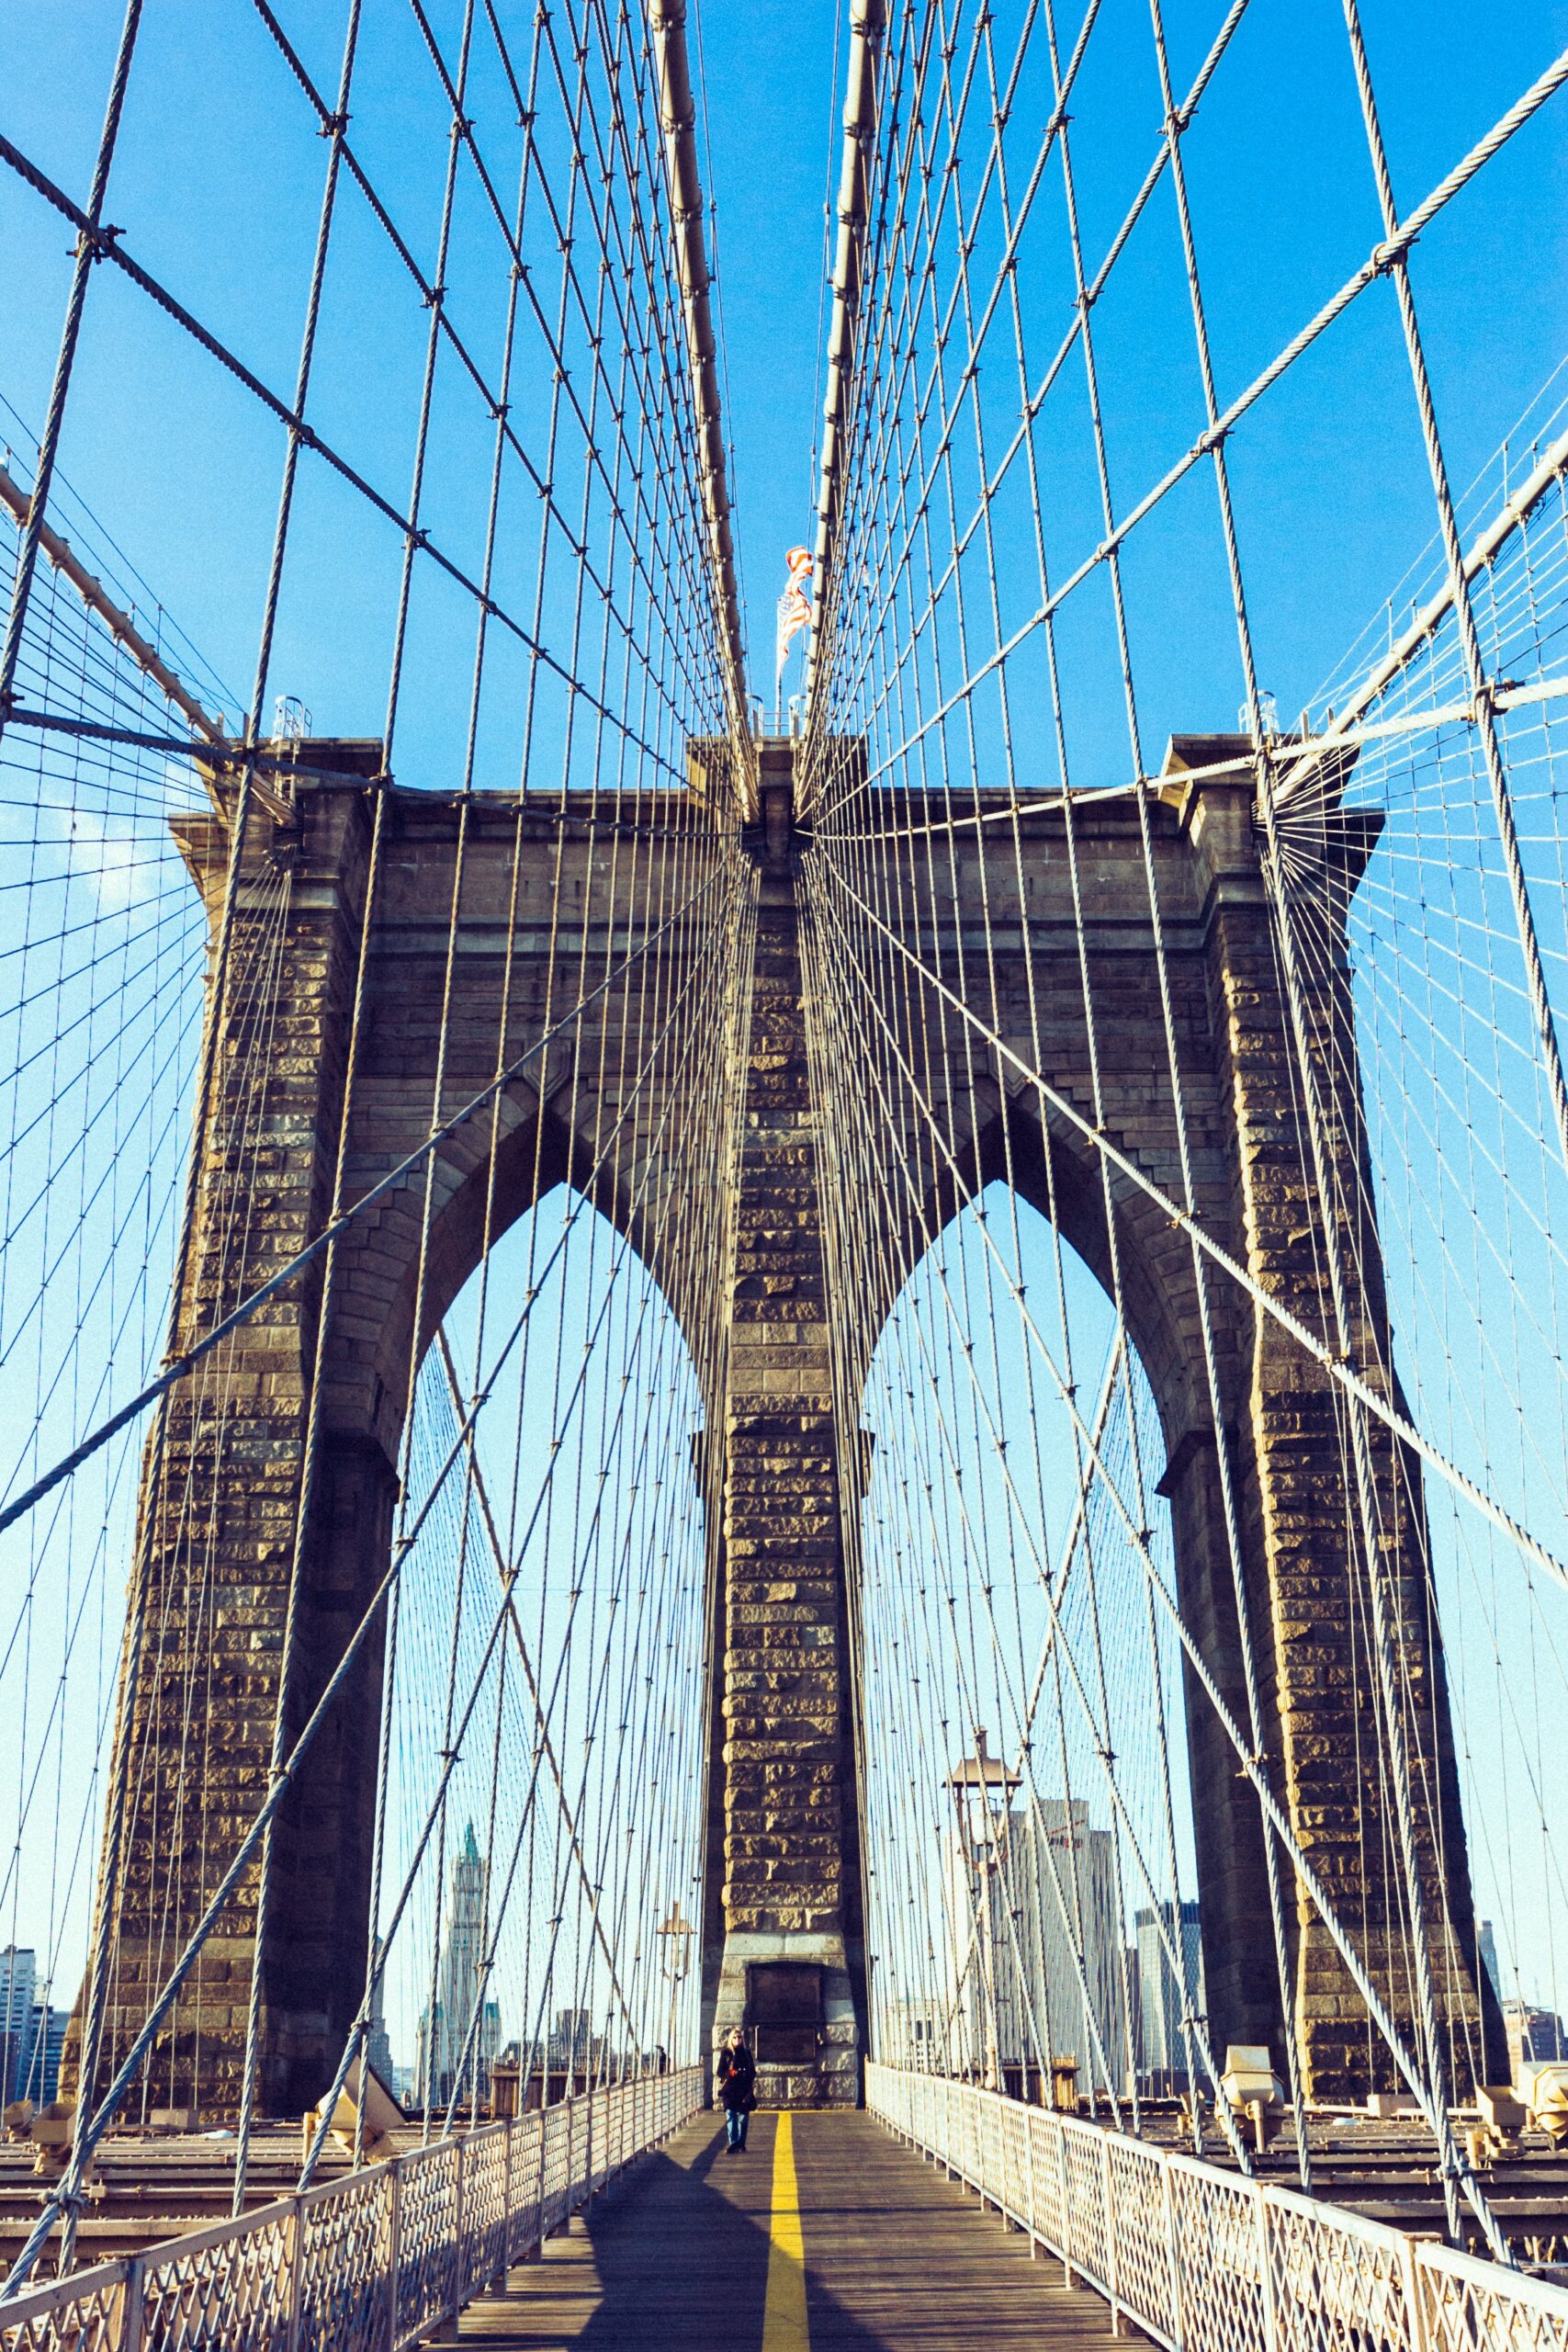 5 Facts About the Brooklyn Bridge